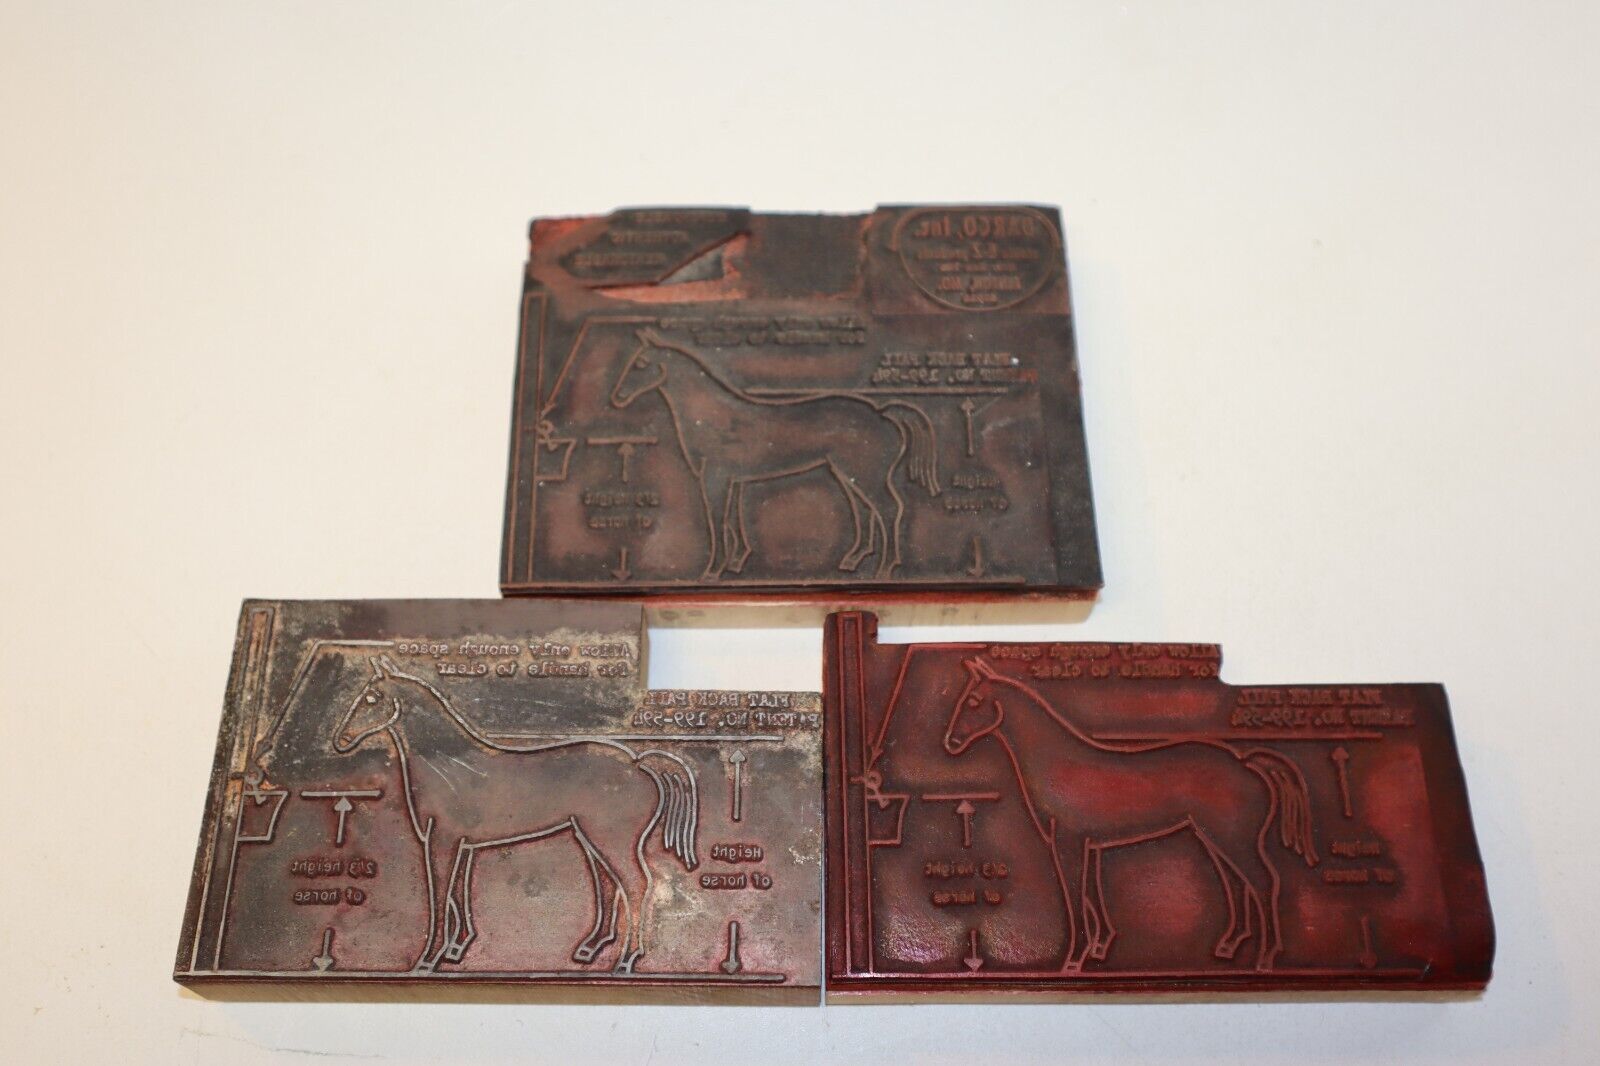 Primary image for Lot of 3 Vintage Wood Block Rubber Ink Stamps Darco EZ Stable Horses Fenton, MO